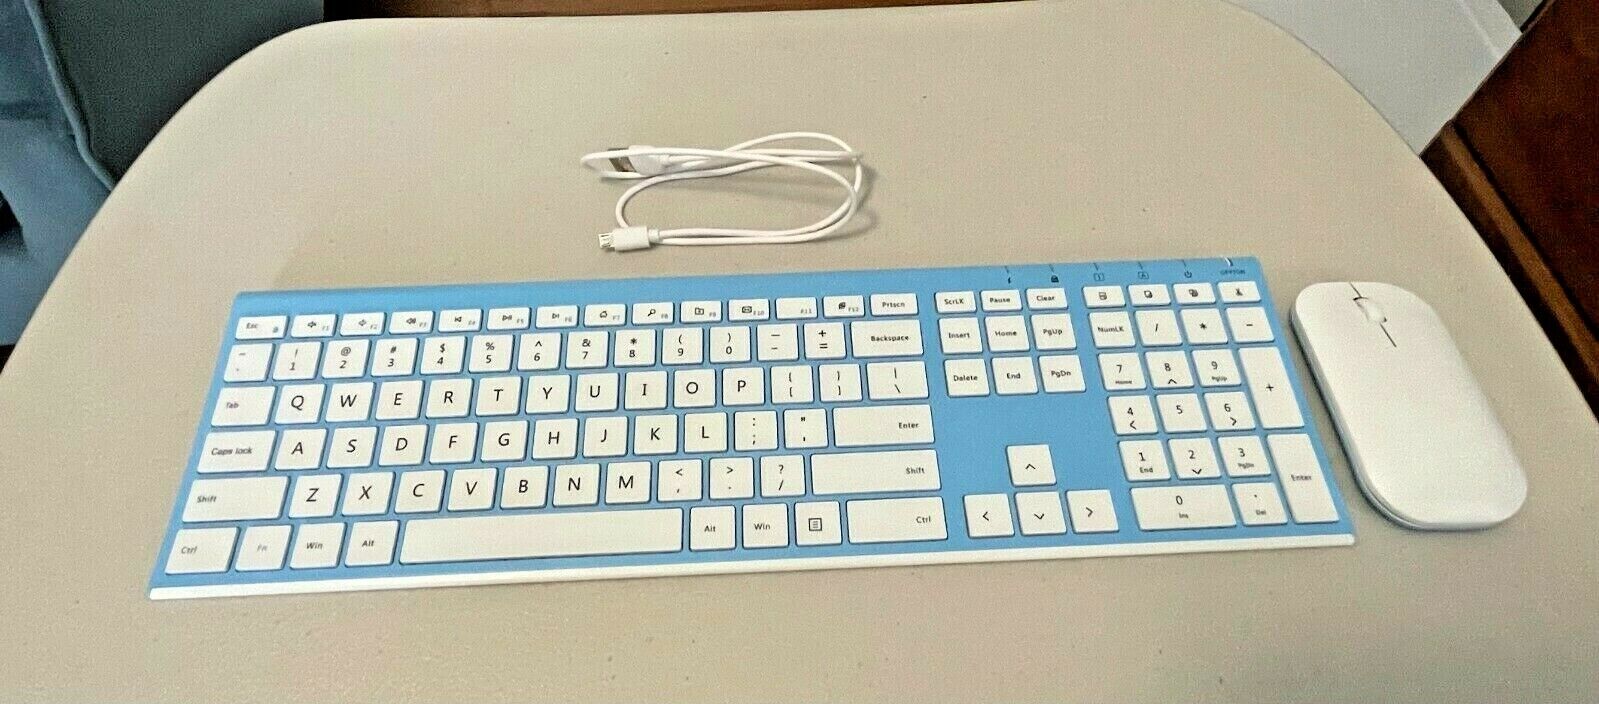 Jelly Comb Blue and White Wireless Keyboard and Mouse Rechargeable Slim Design